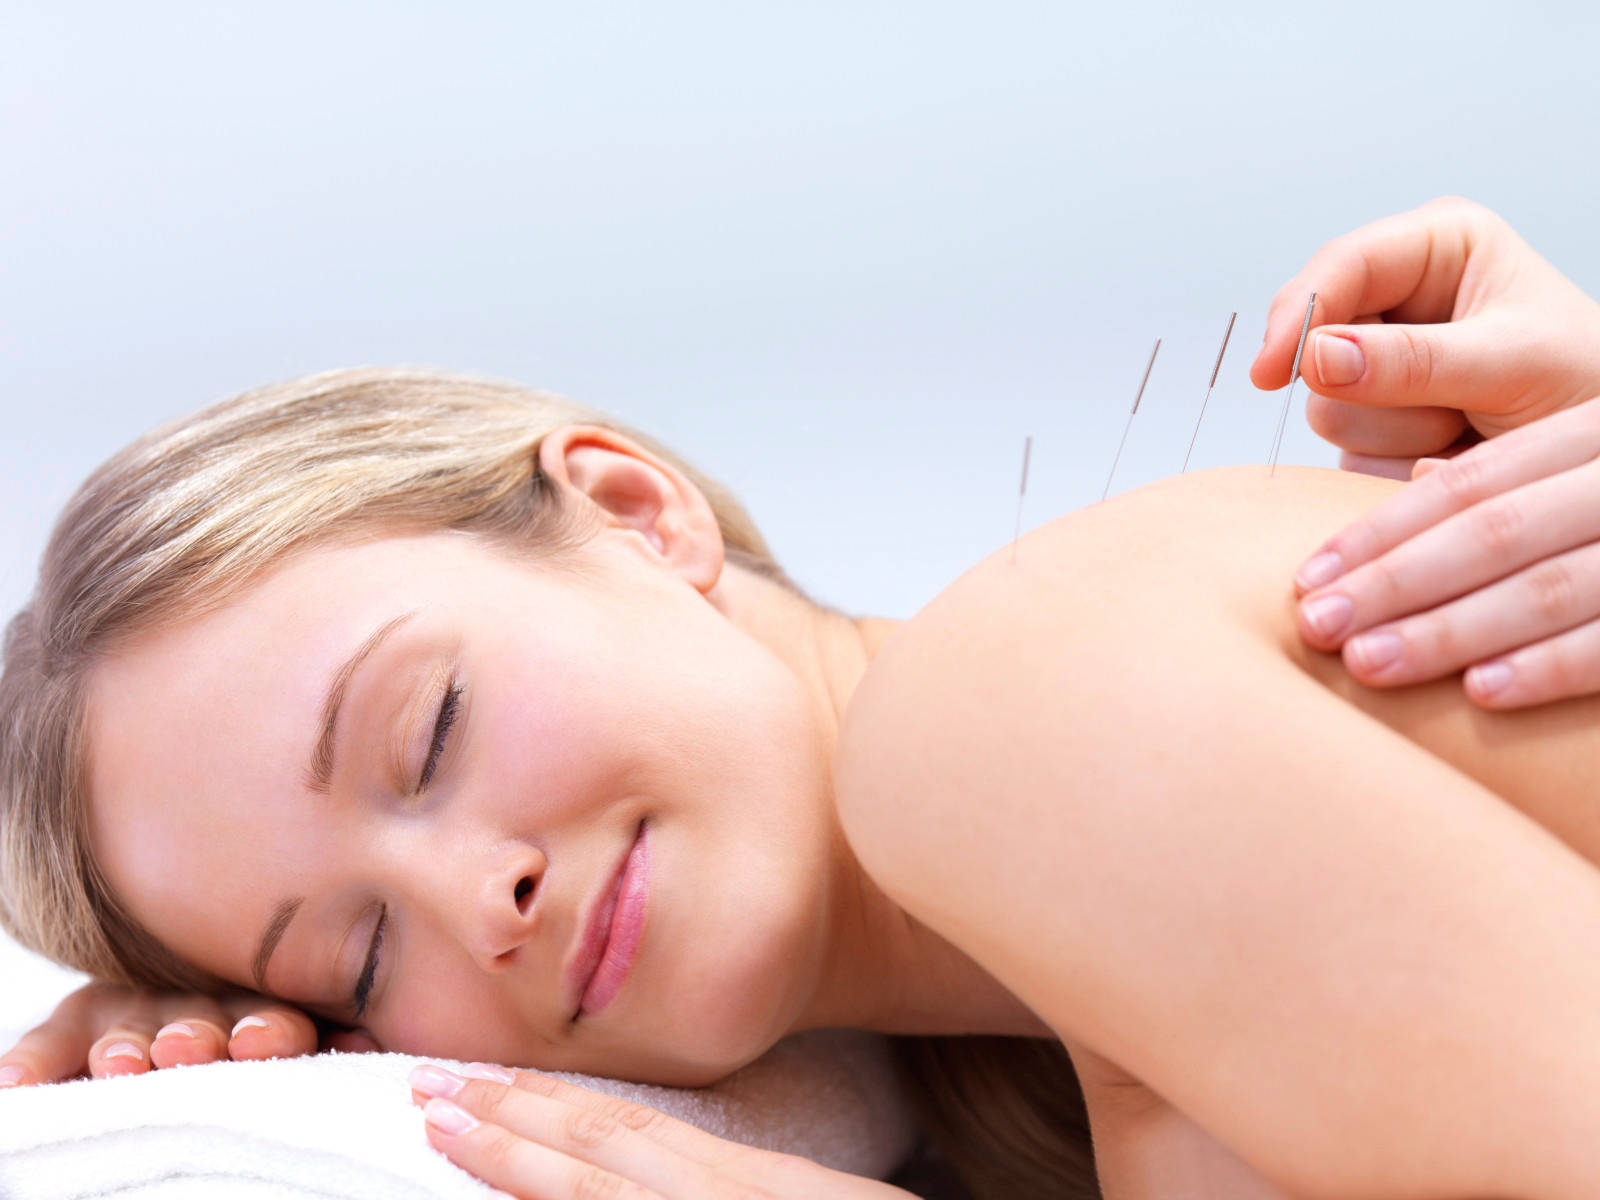 Acupuncturist Back Needle Therapy Wallpaper